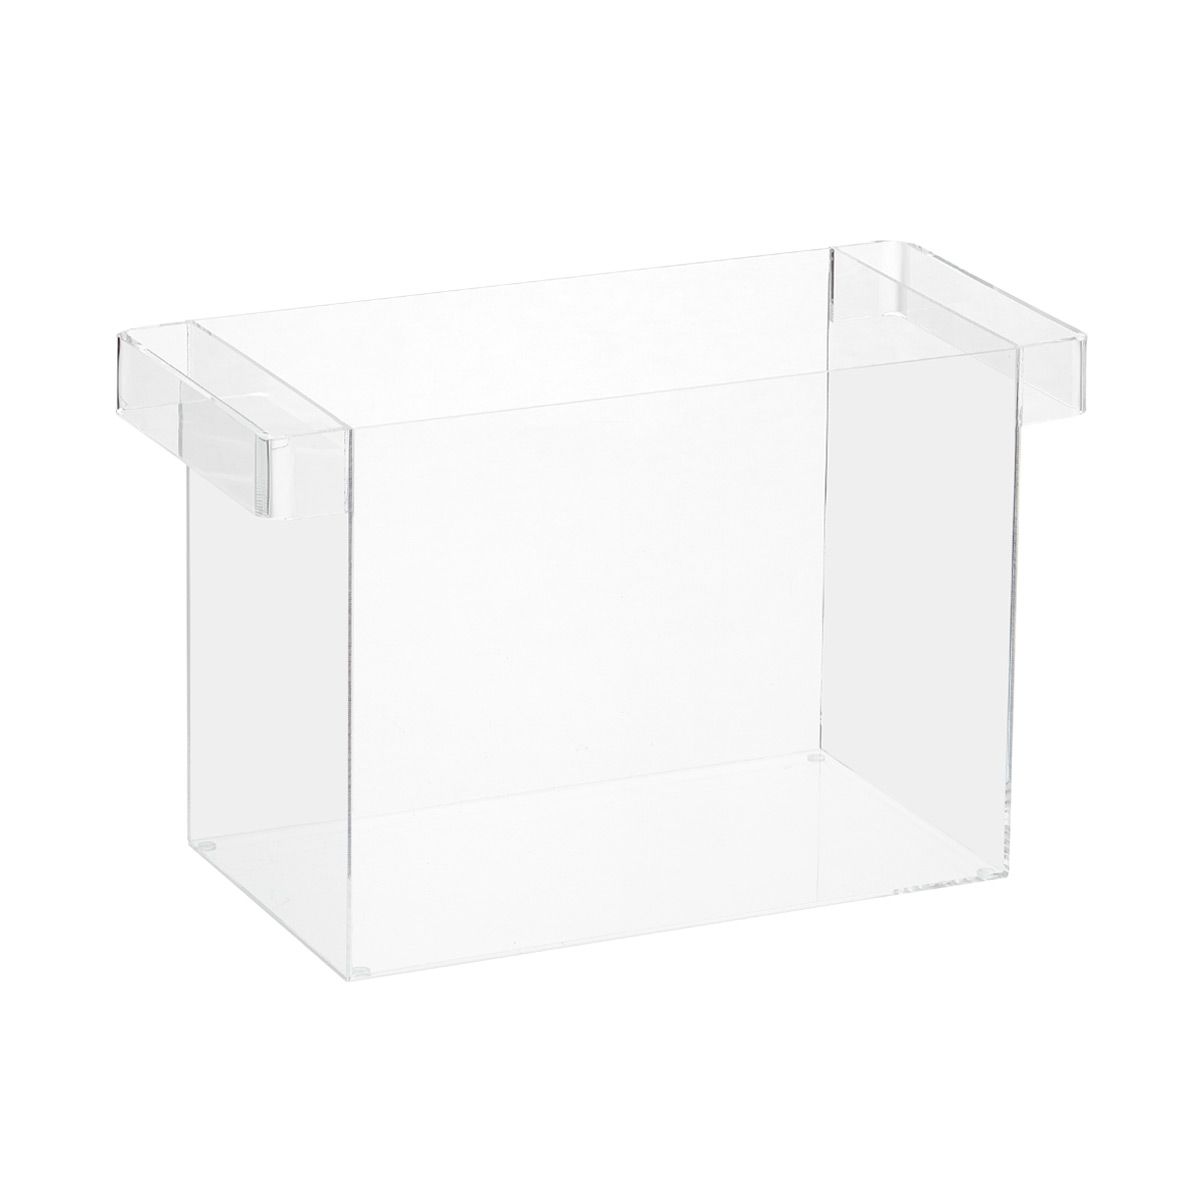 Desktop File Acrylic | The Container Store